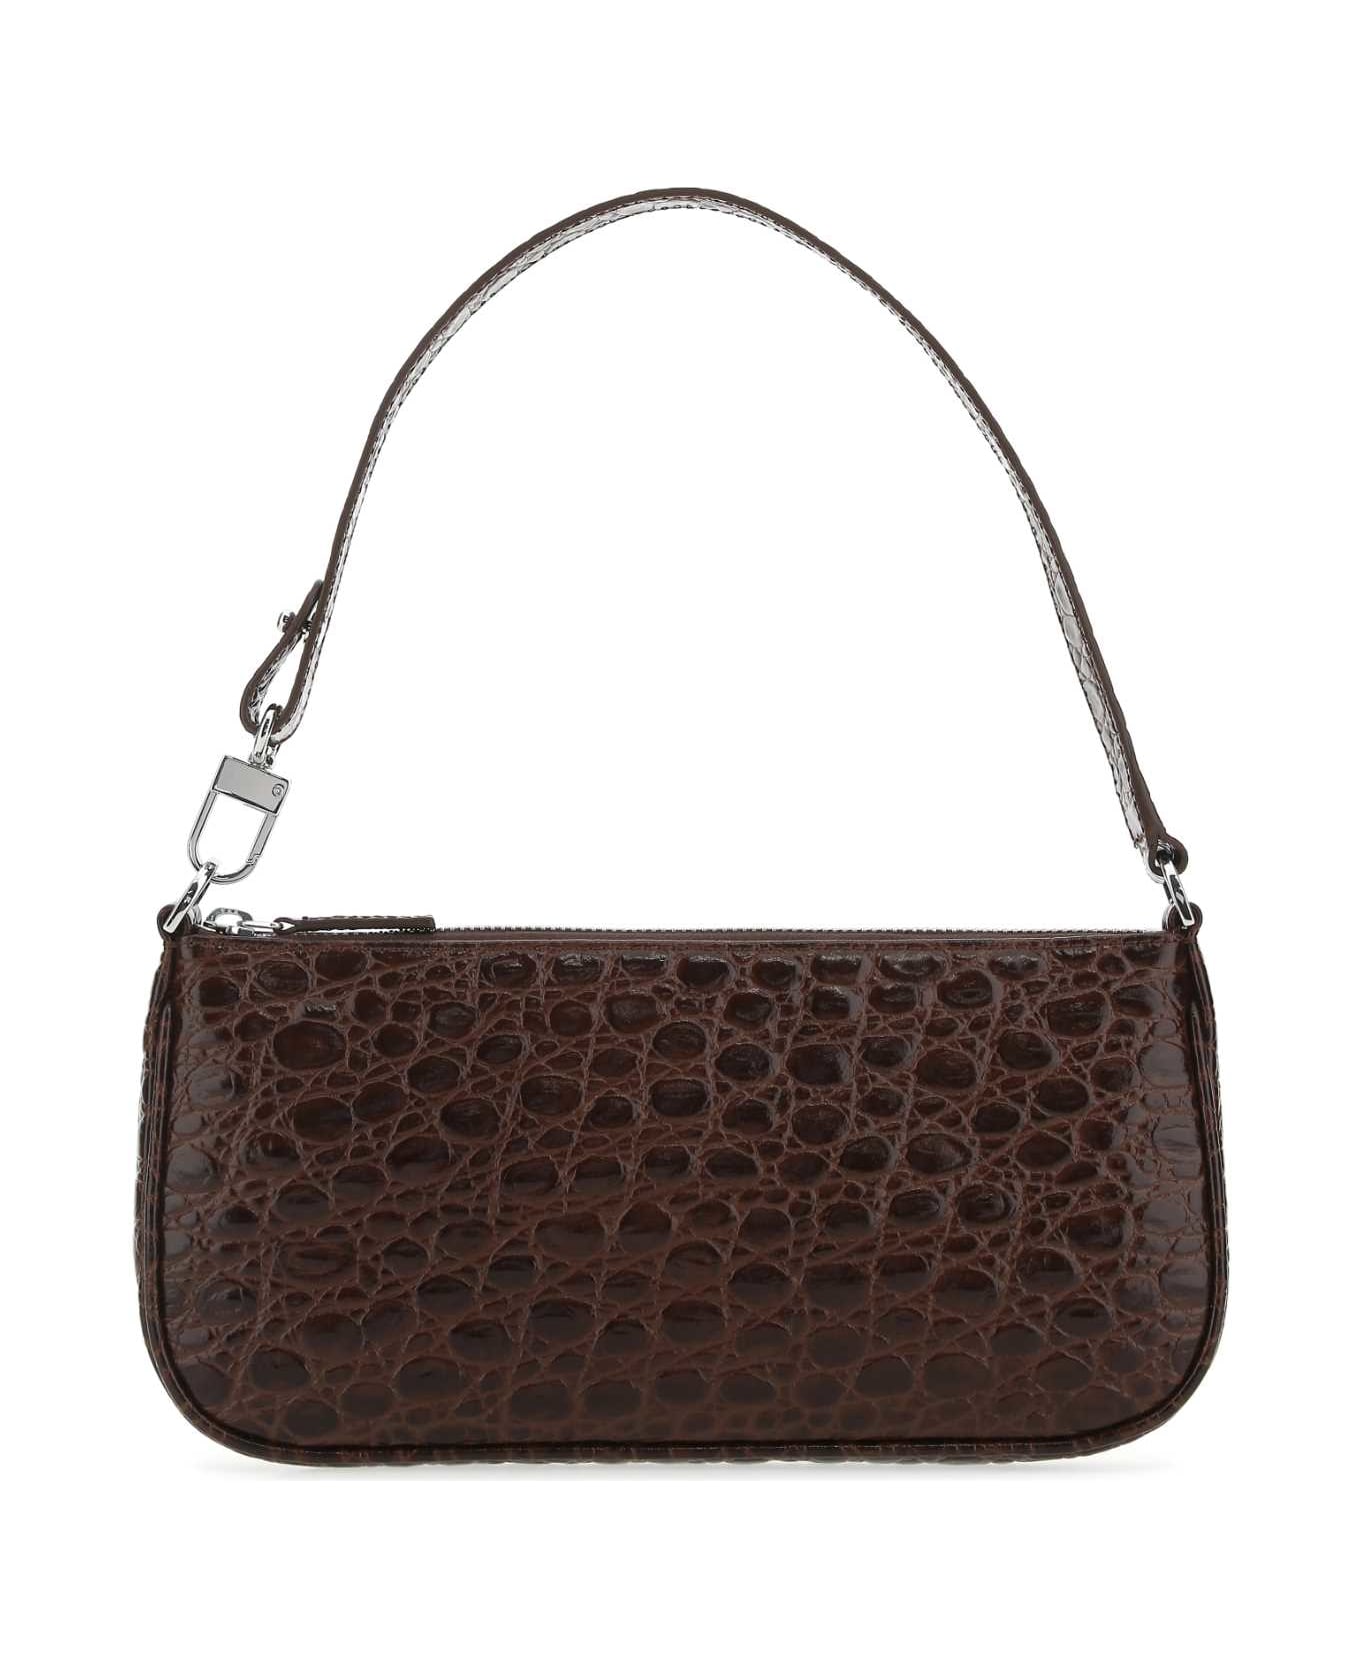 BY FAR Chocolate Leather Shoulder Bag - SEQ トートバッグ